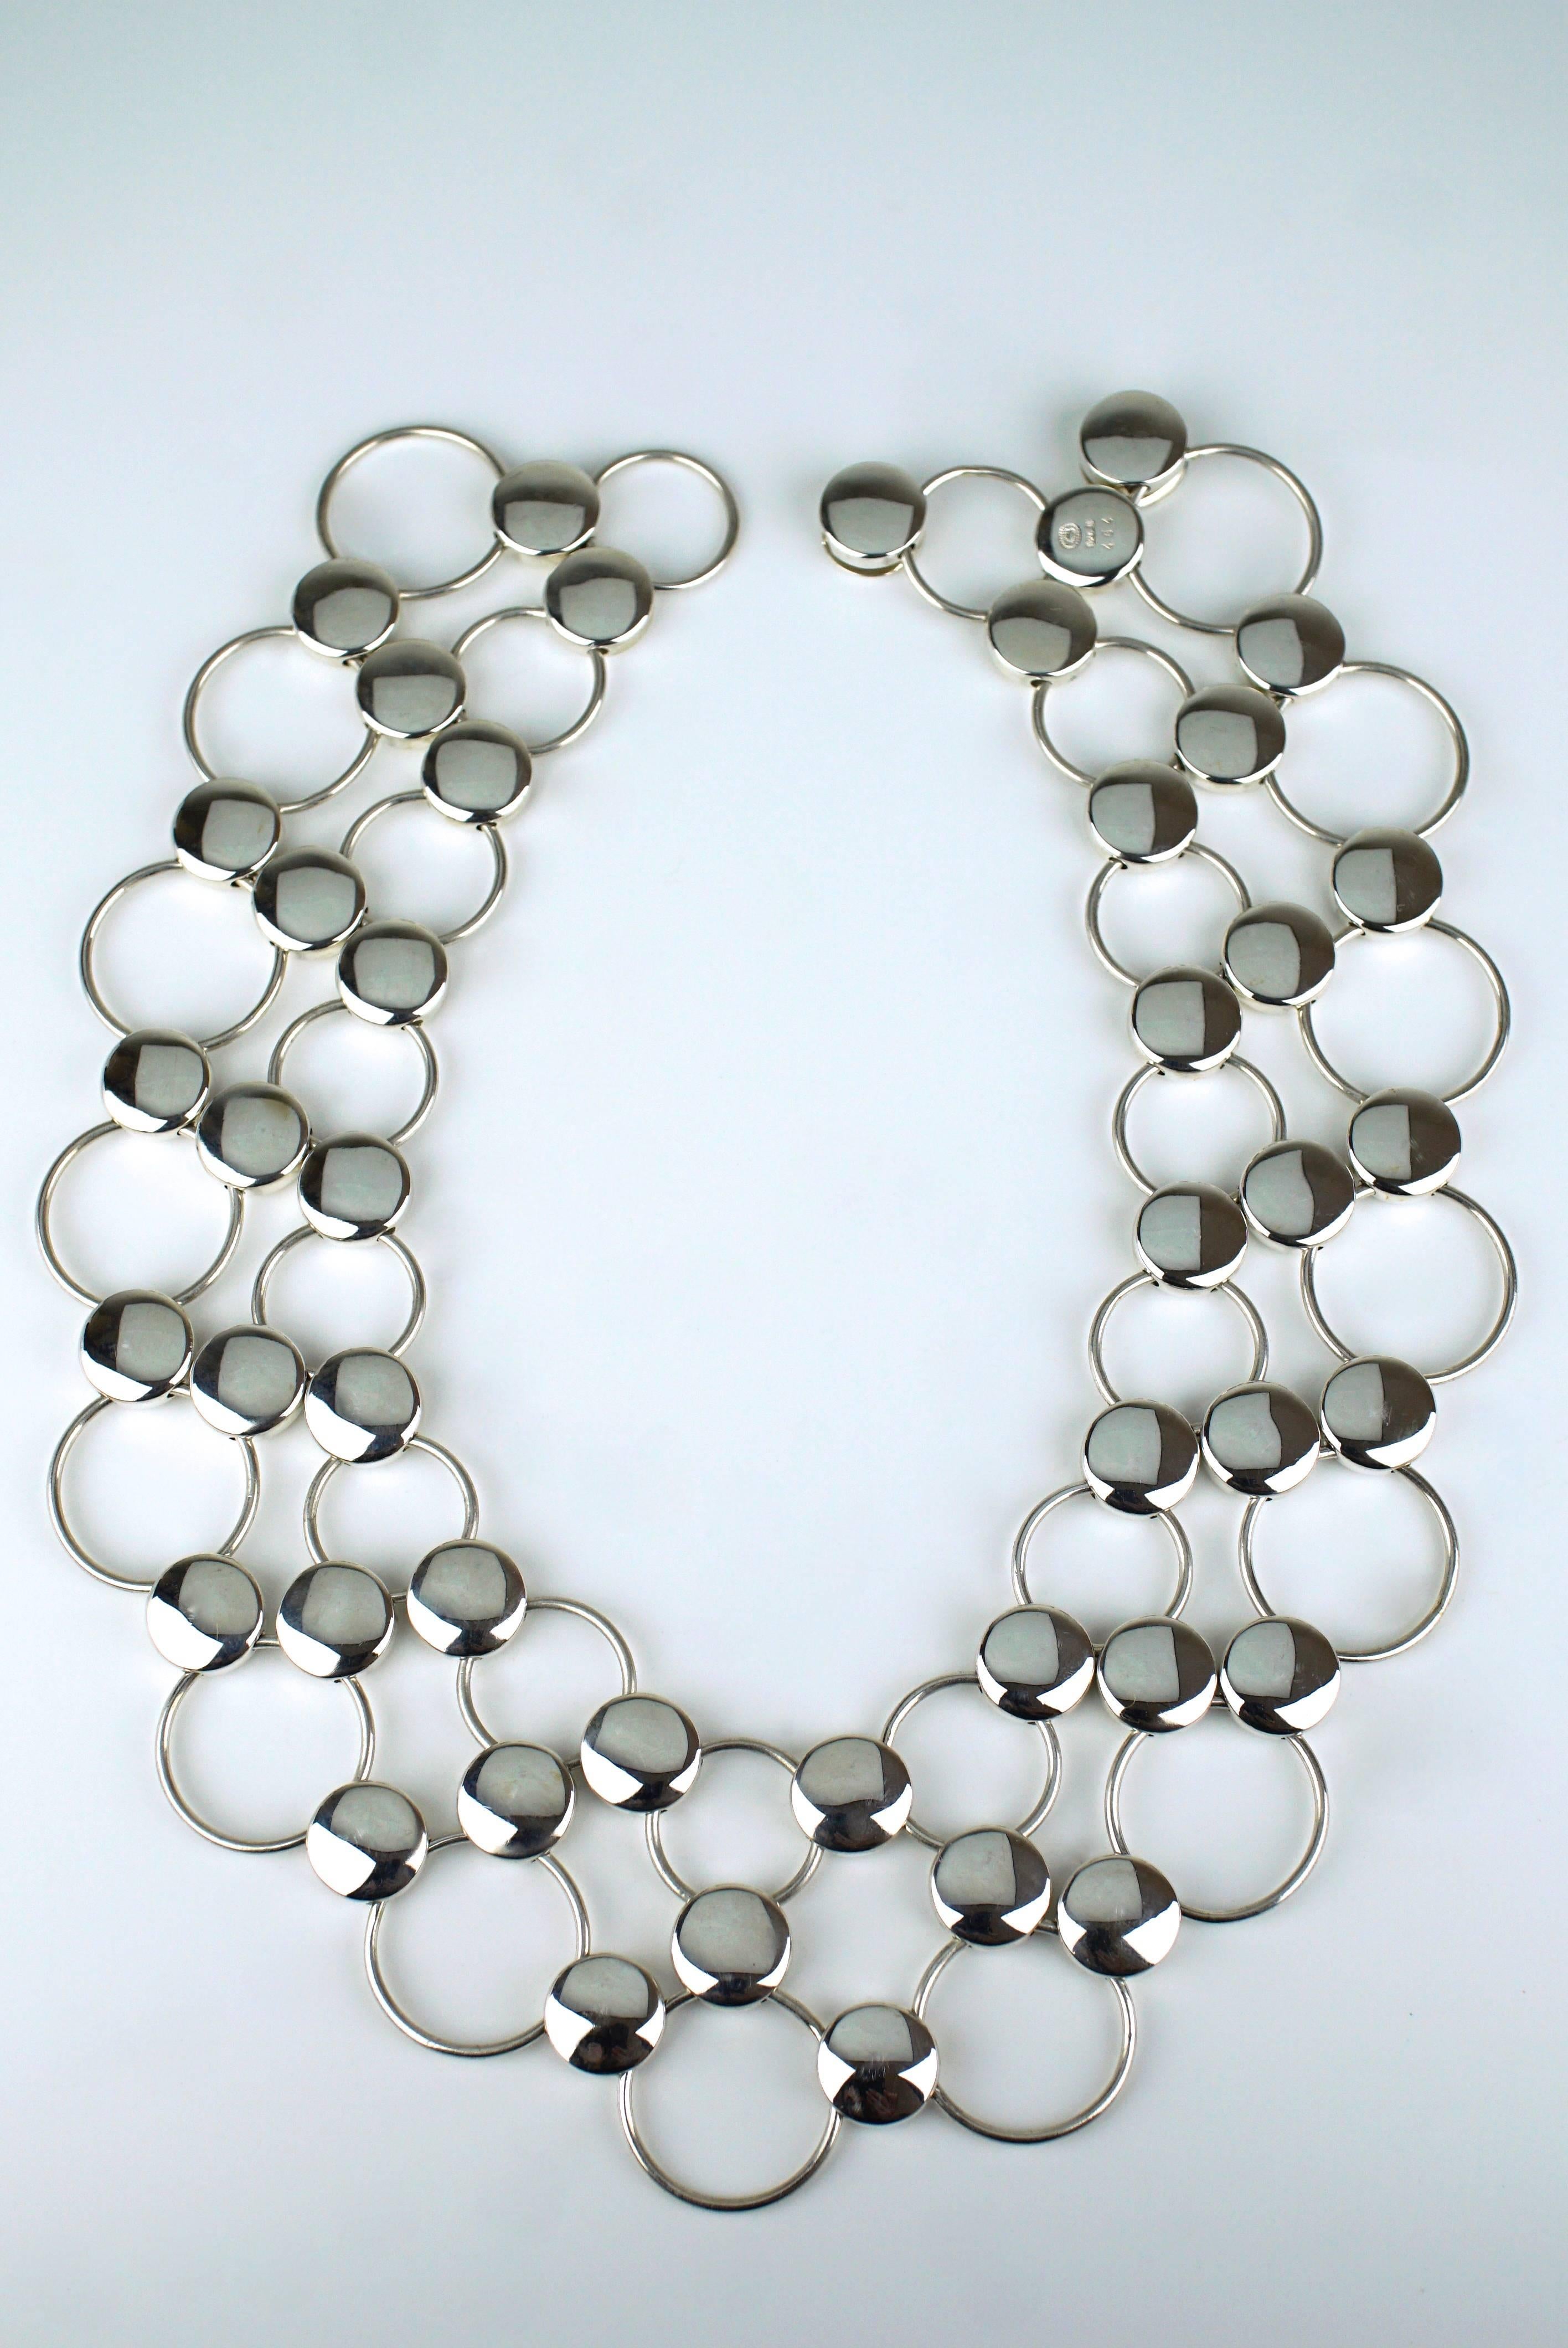 A solid silver dot and ring necklace - a multi row collar of alternating solid dots and open rings forming a flexible collar 

- marked with post 1945 marks for Georg Jensen of Copenhagen
- design number 464 by Regitze Overgaard 
- total weight